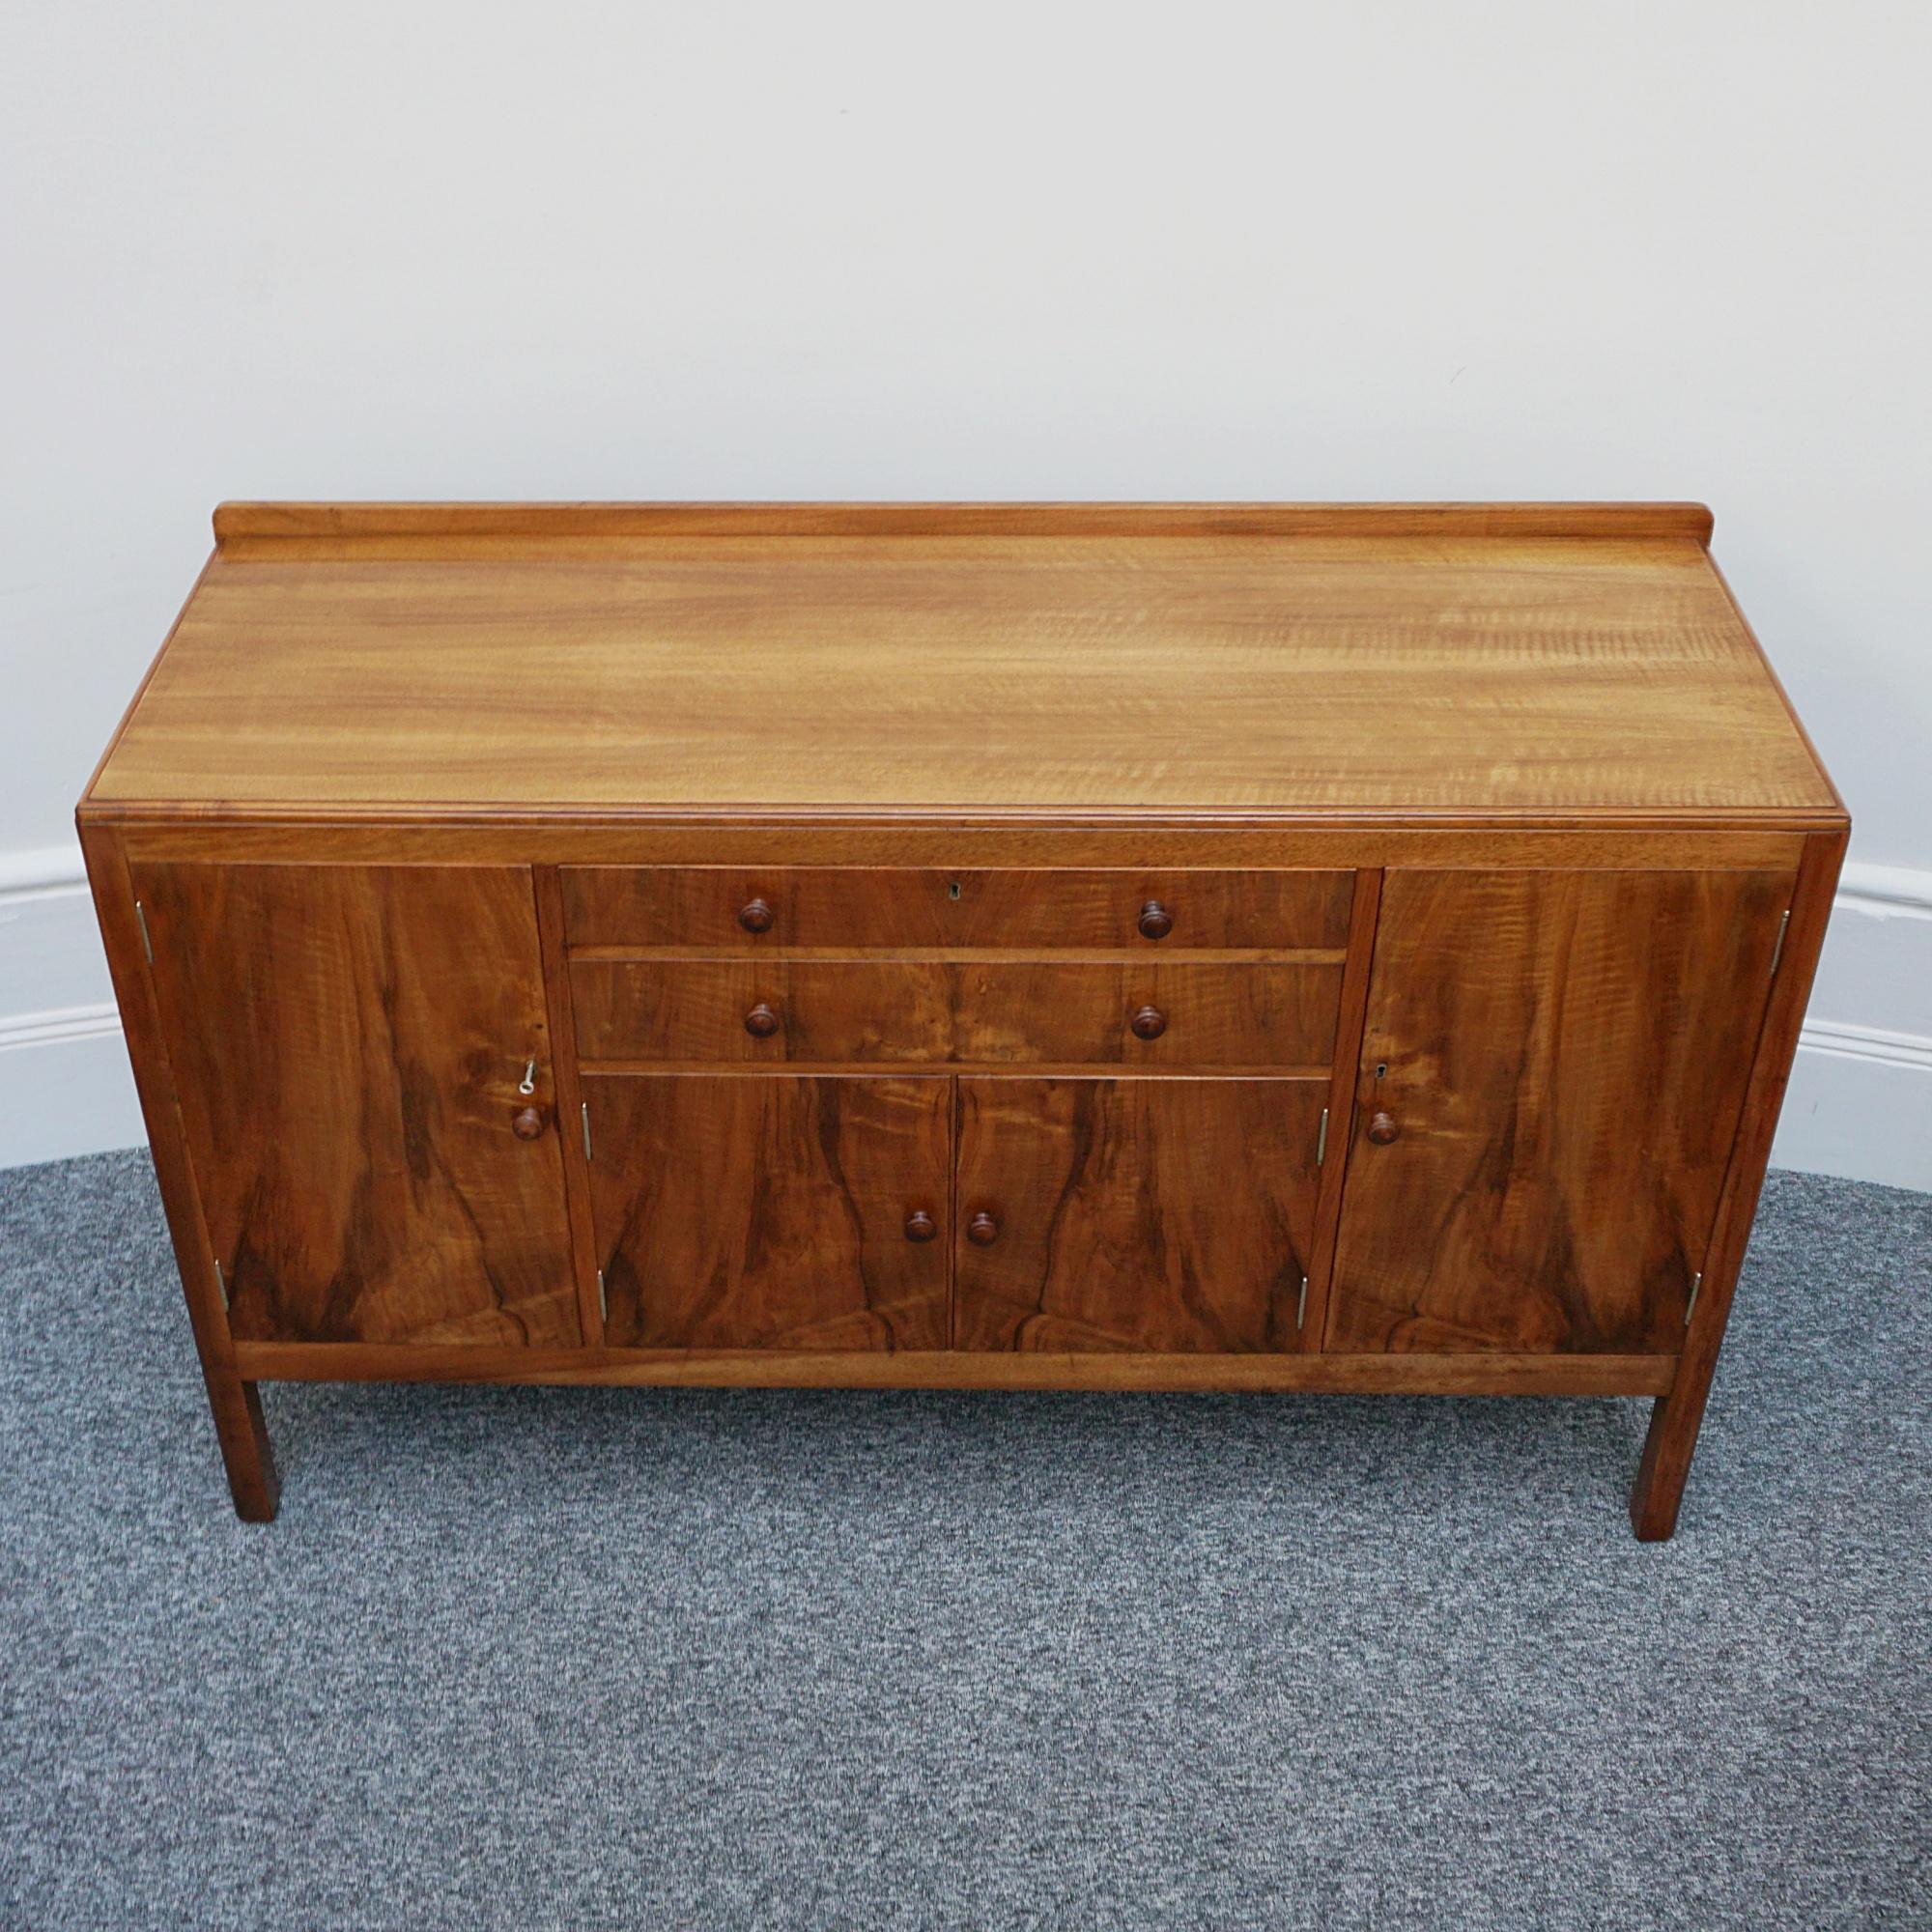 An Art Deco sideboard by Heal's of London. Burr walnut and figured walnut veneered with original walnut handles. Two central upper drawers with lower cupboard compartment flanked be two shelved cabinets.

Dimensions: H 92cm W 101cm D 52cm

Origin: